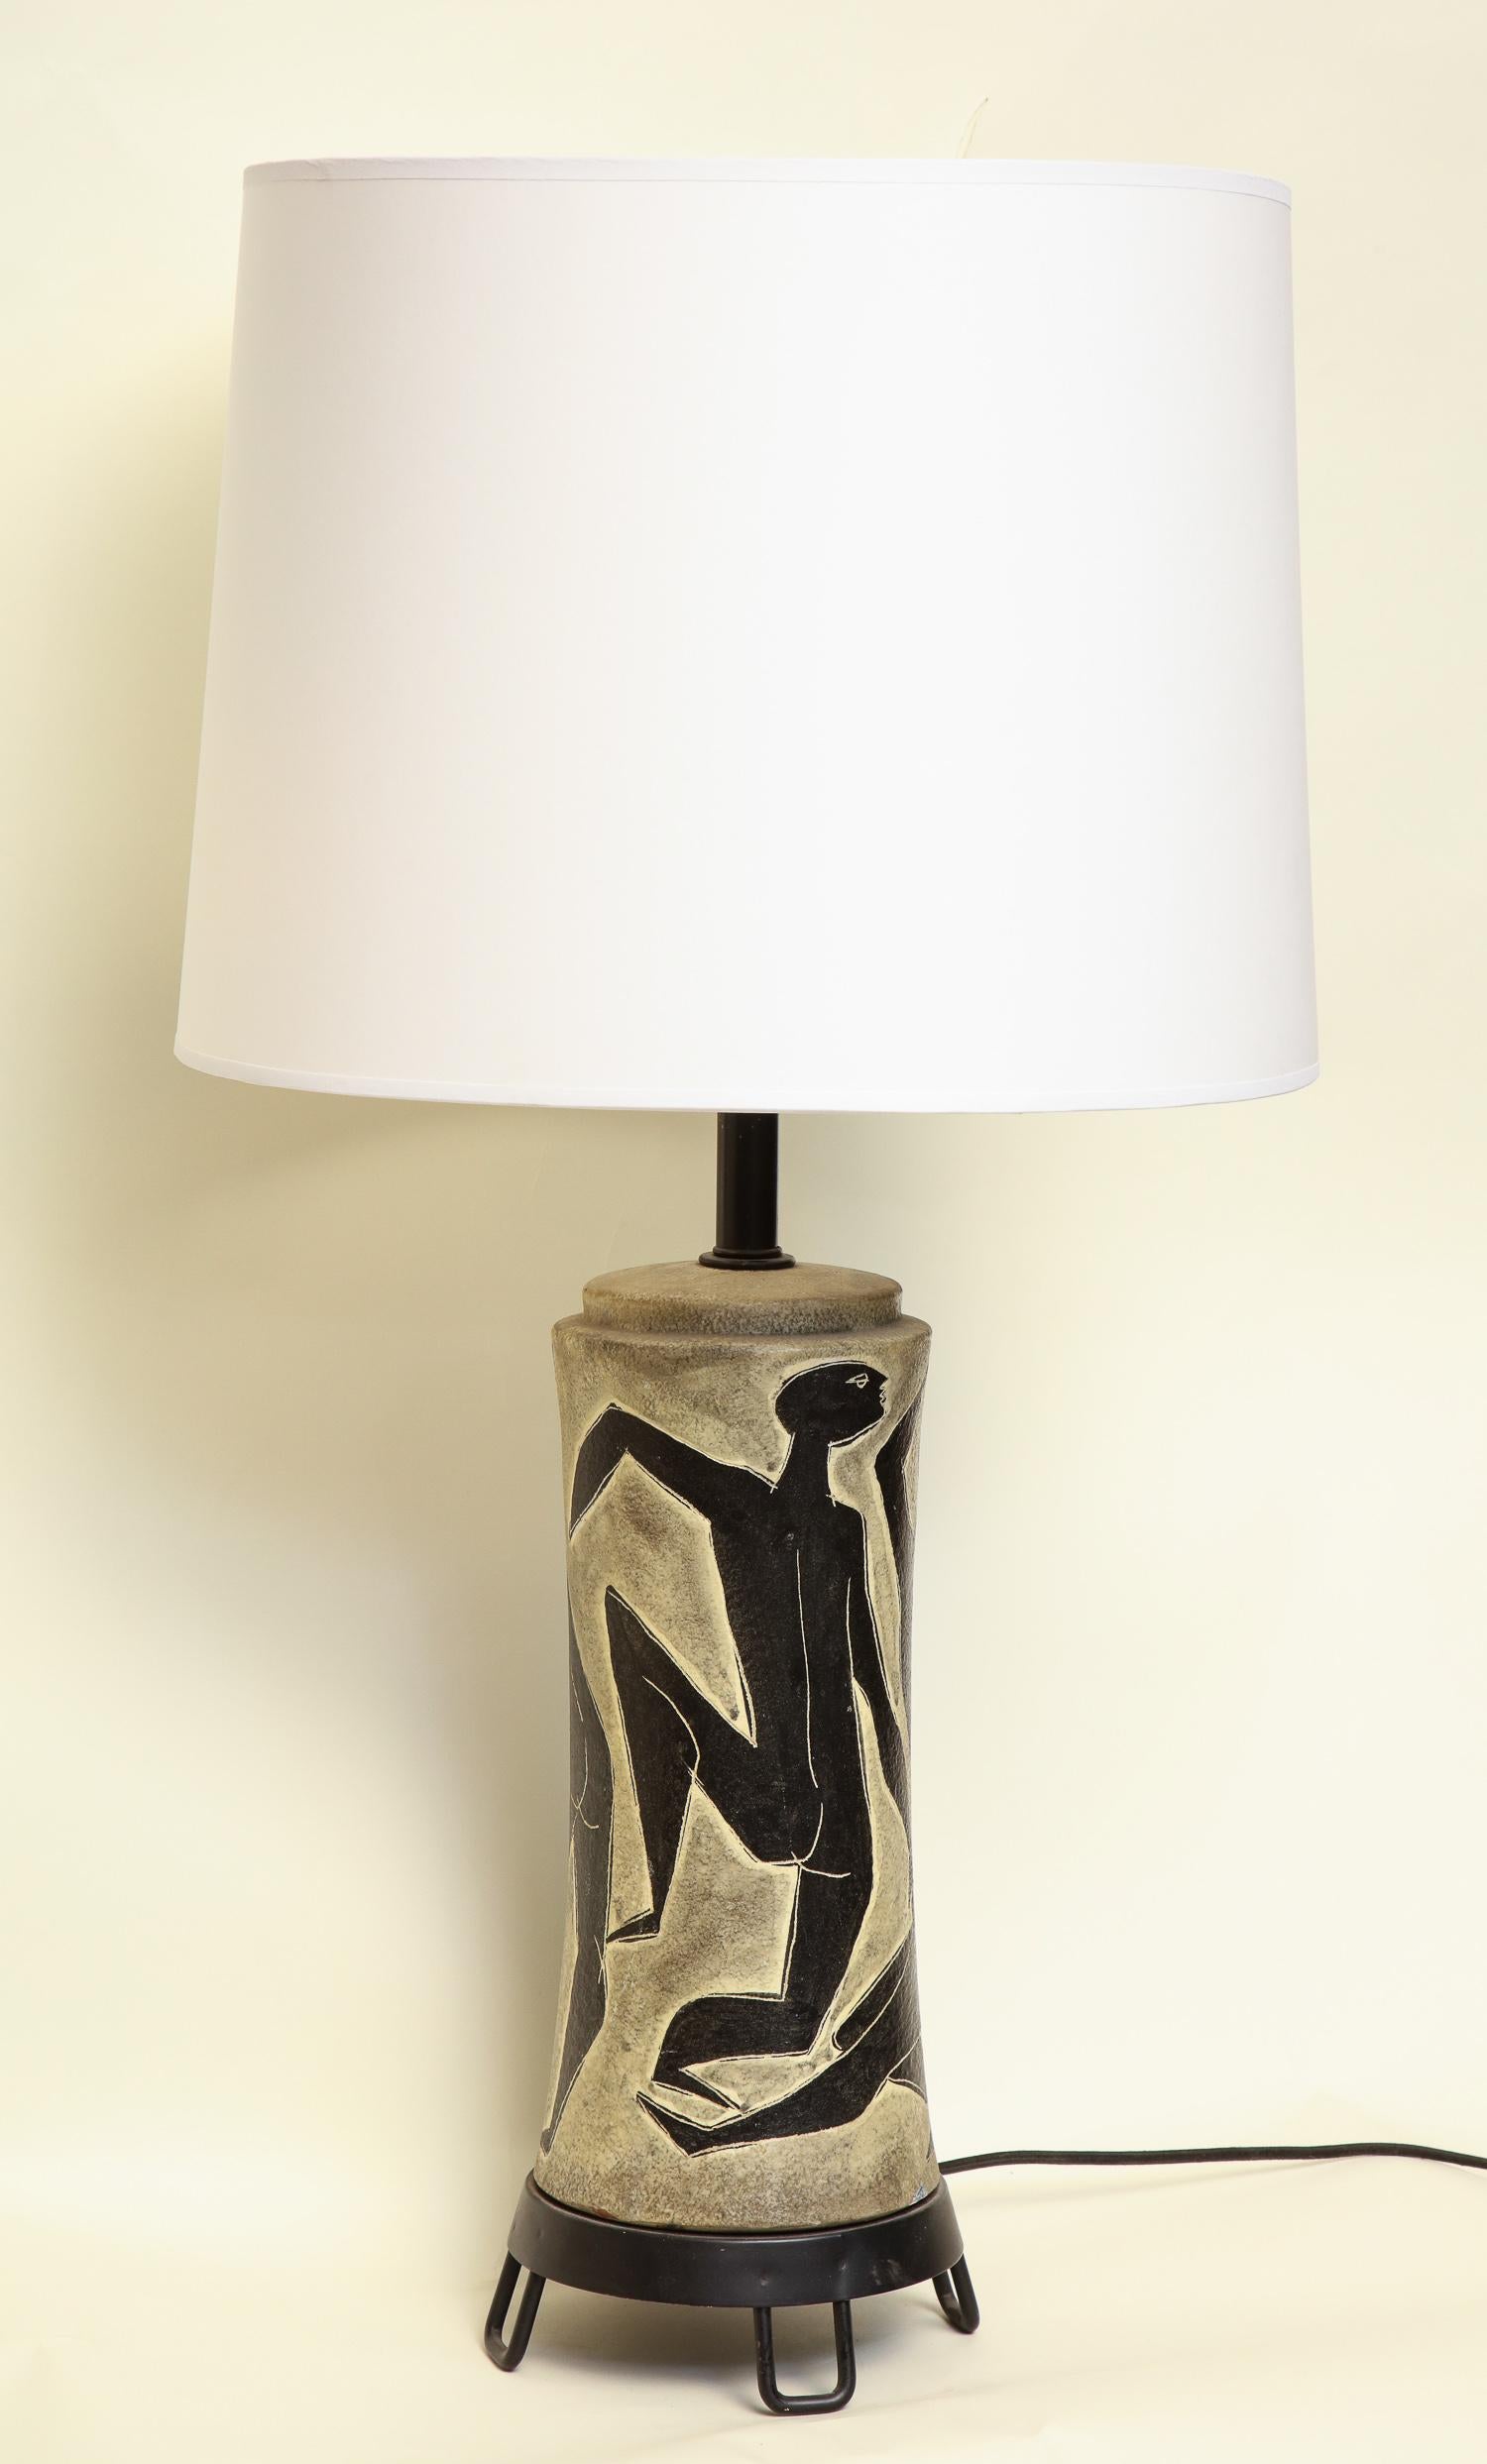 A table lamp signed Fantoni Italy ceramic with incised stylized Men iron base new sockets and rewired
Shade not included.